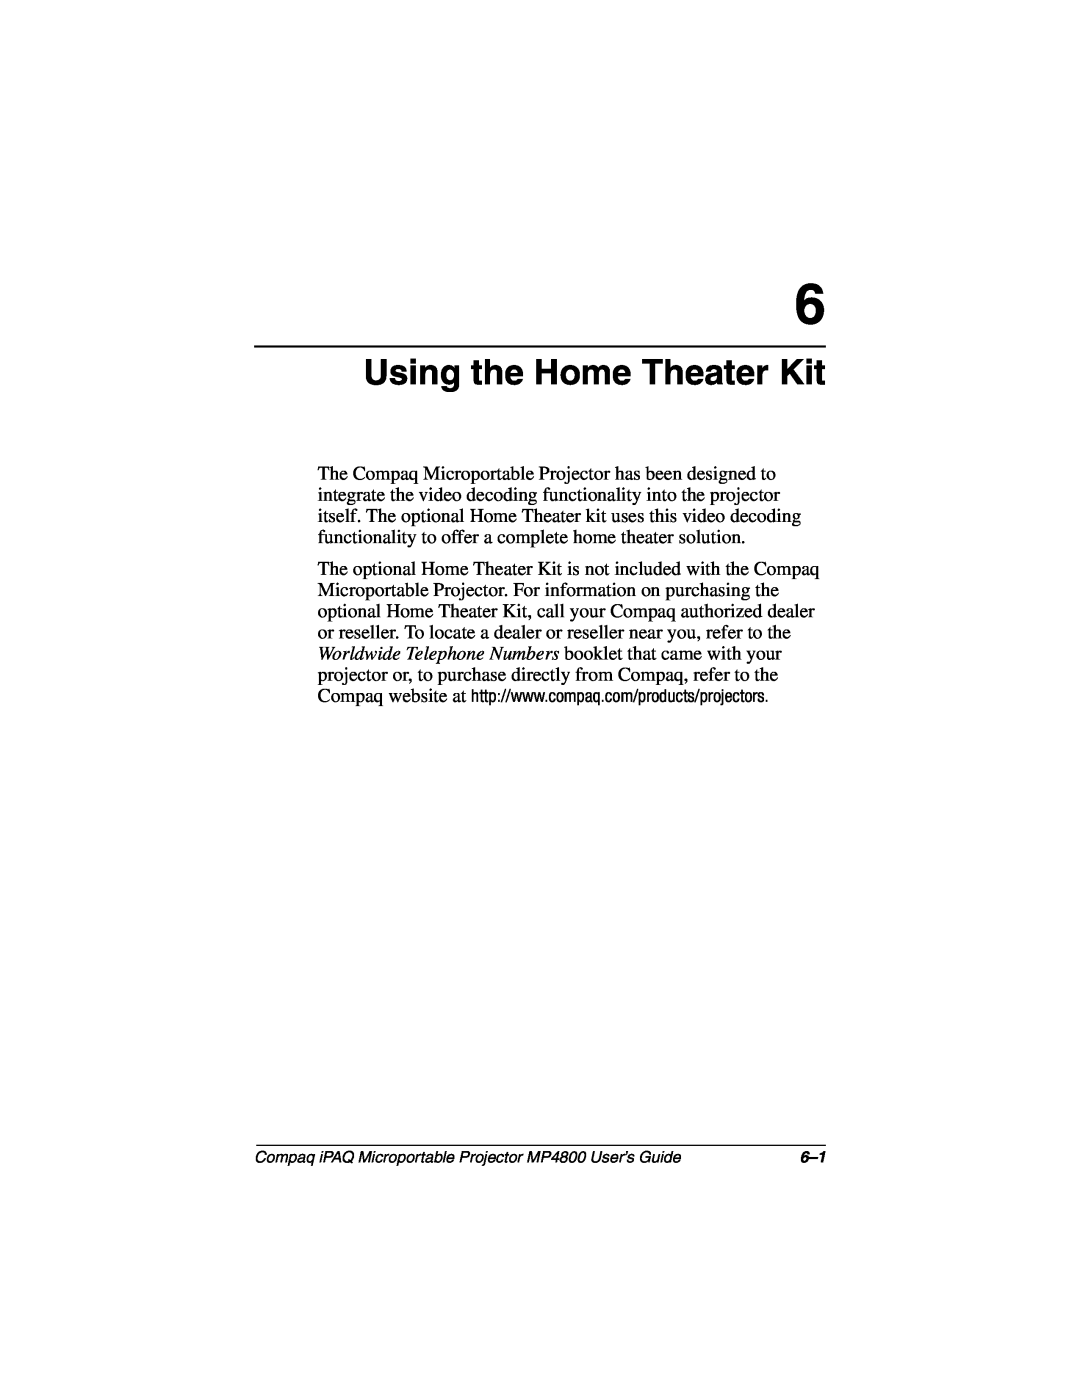 Compaq manual Using the Home Theater Kit, Compaq iPAQ Microportable Projector MP4800 User’s Guide 